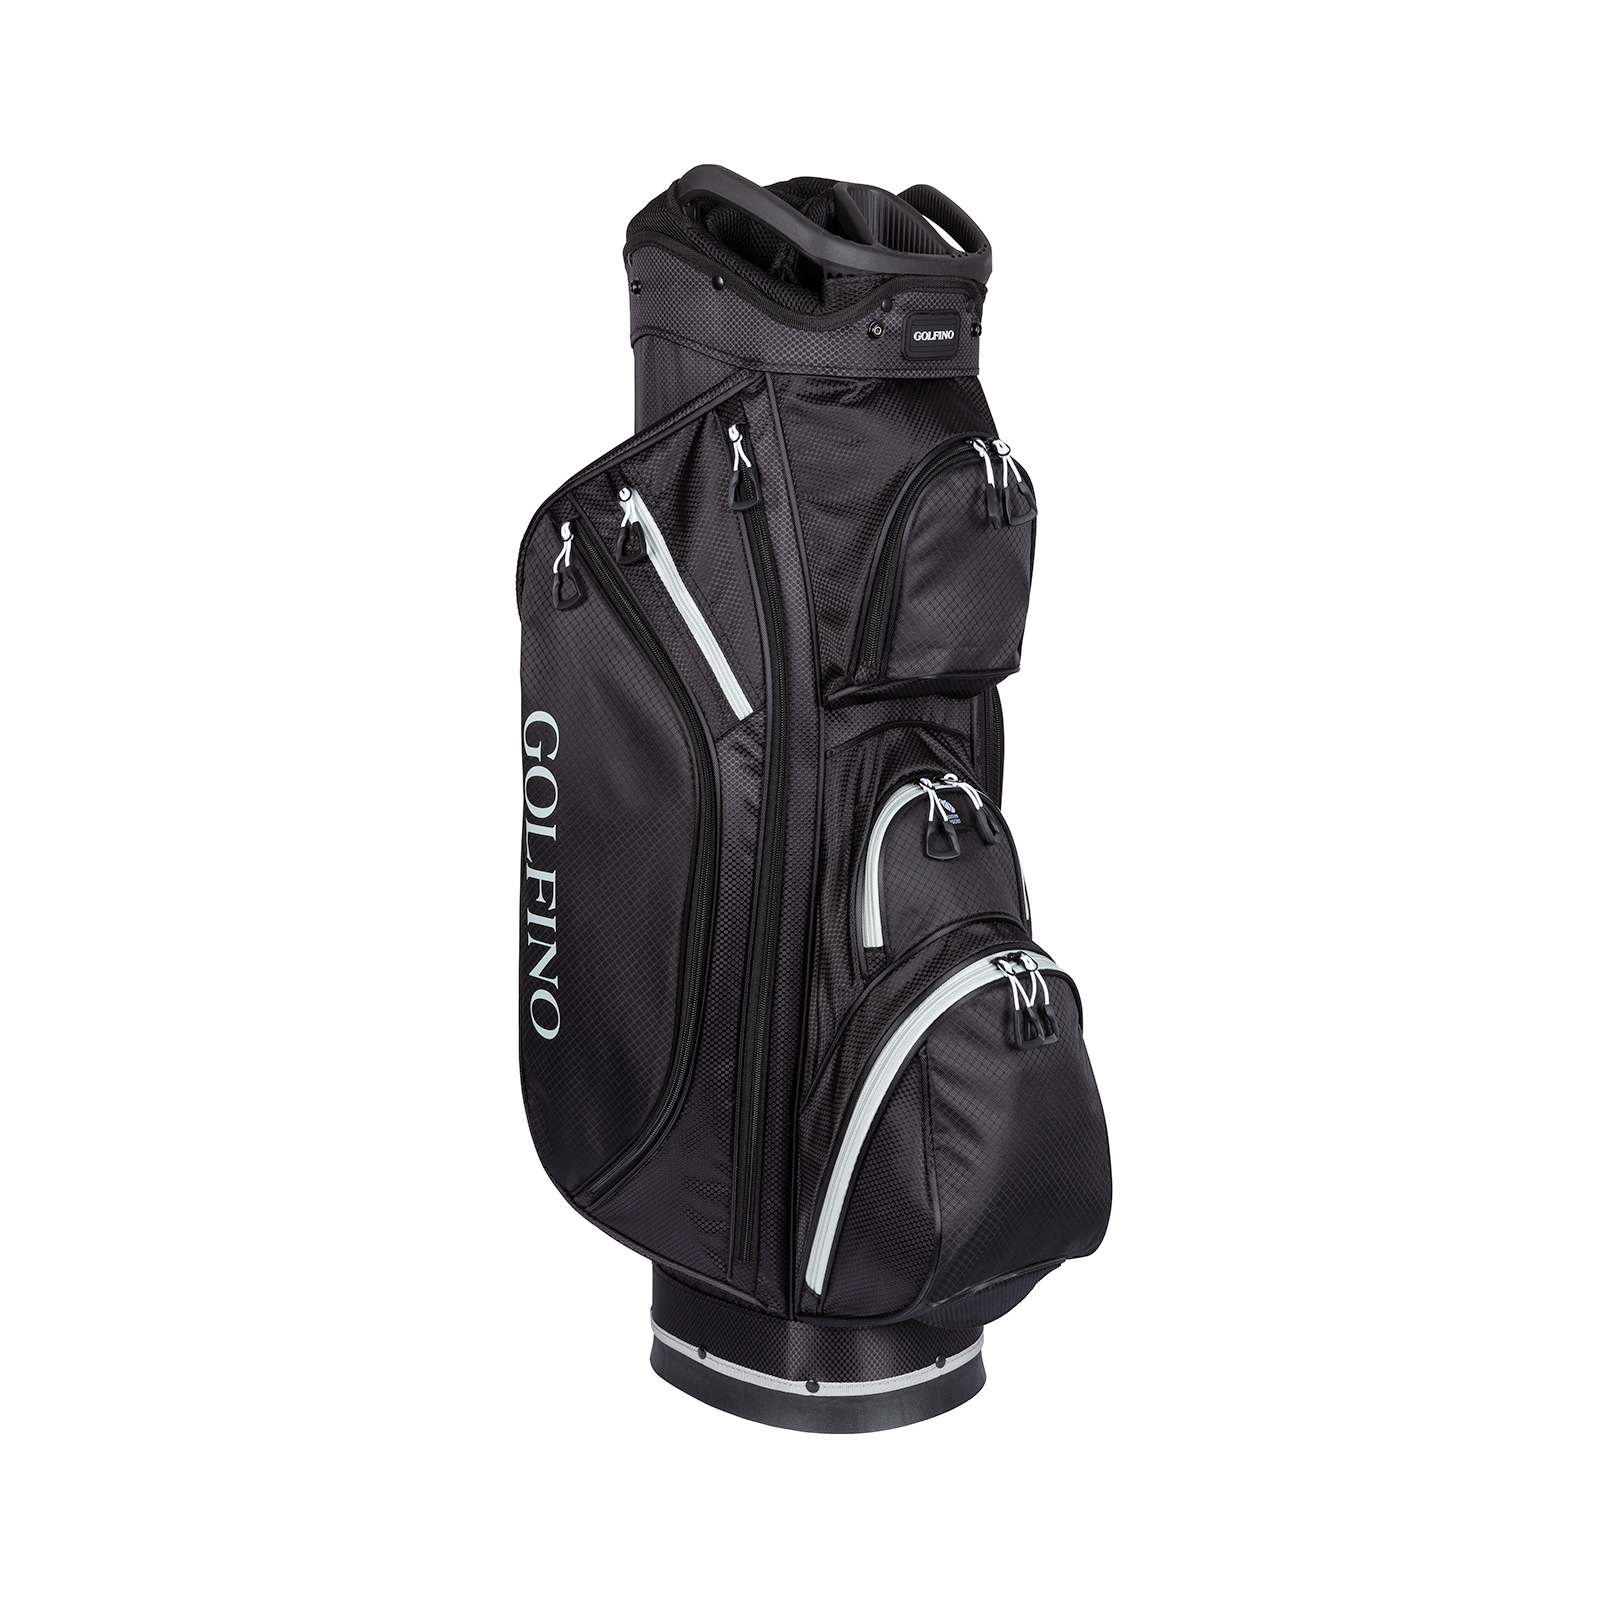 Cart bag with a sporty design